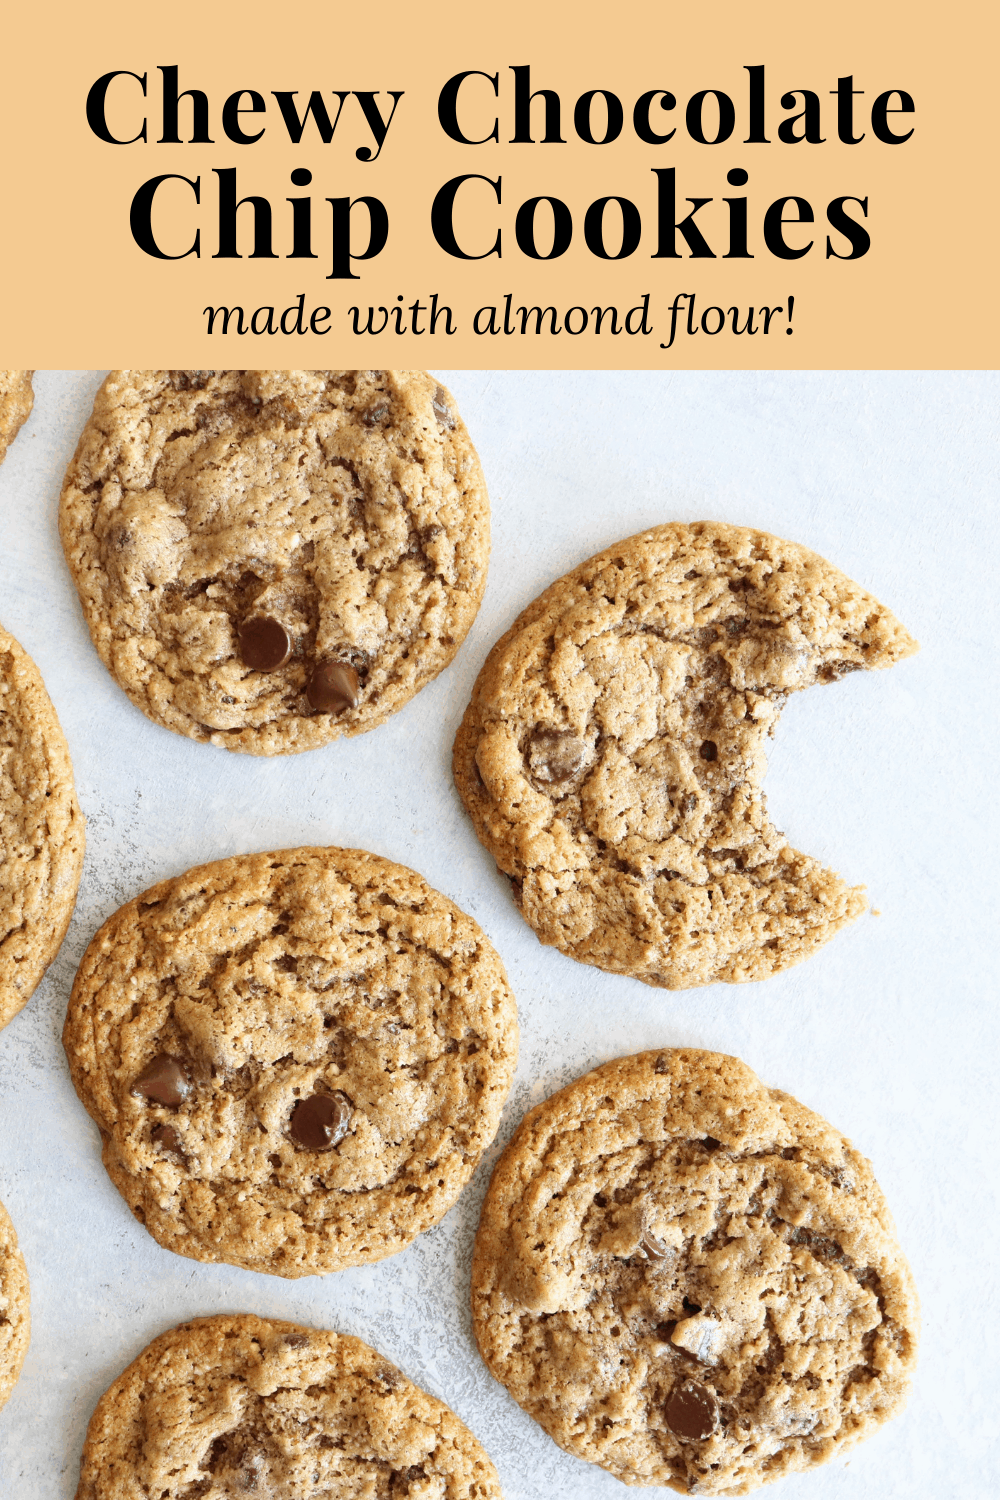 Chewy Almond Flour Chocolate Chip Cookies - The Toasted Pine Nut